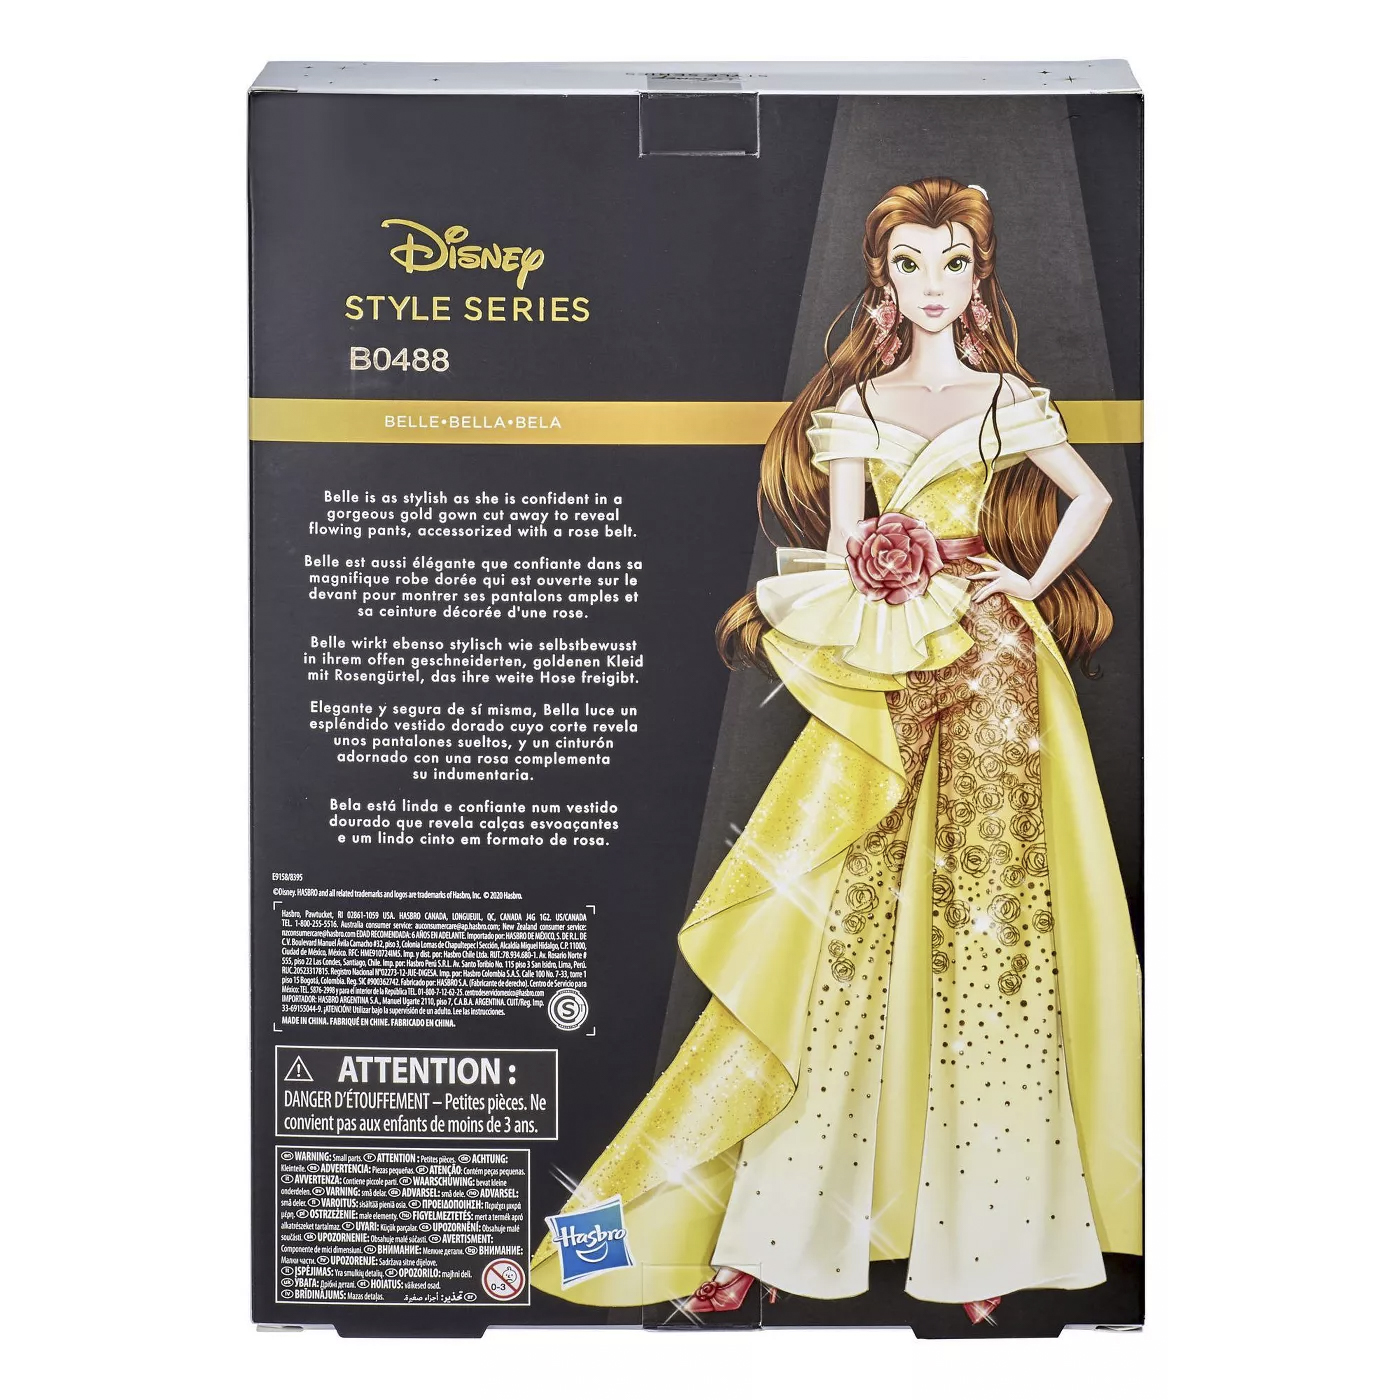 Disney Princess Style Series new Belle and Ariel dolls in